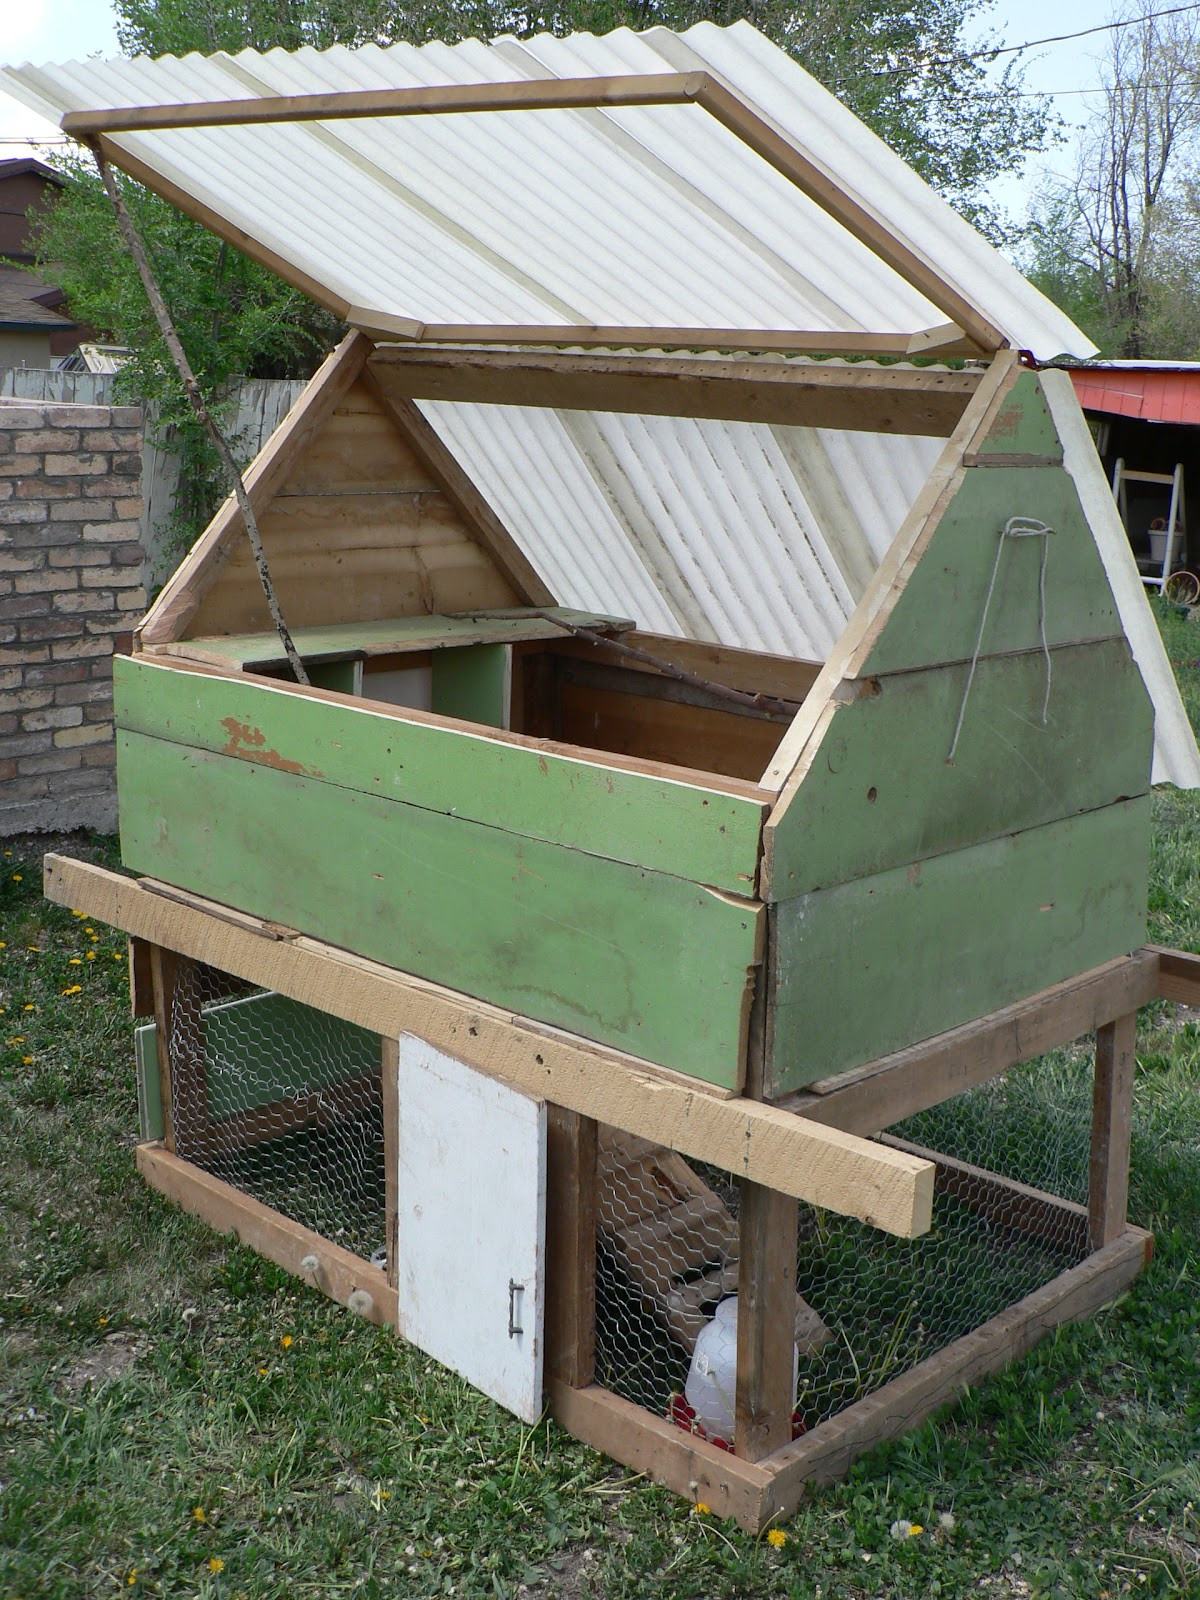 DIY Chicken Coops Plans Free
 How To Build A Cheap Chicken Coop Plans Plans DIY Free